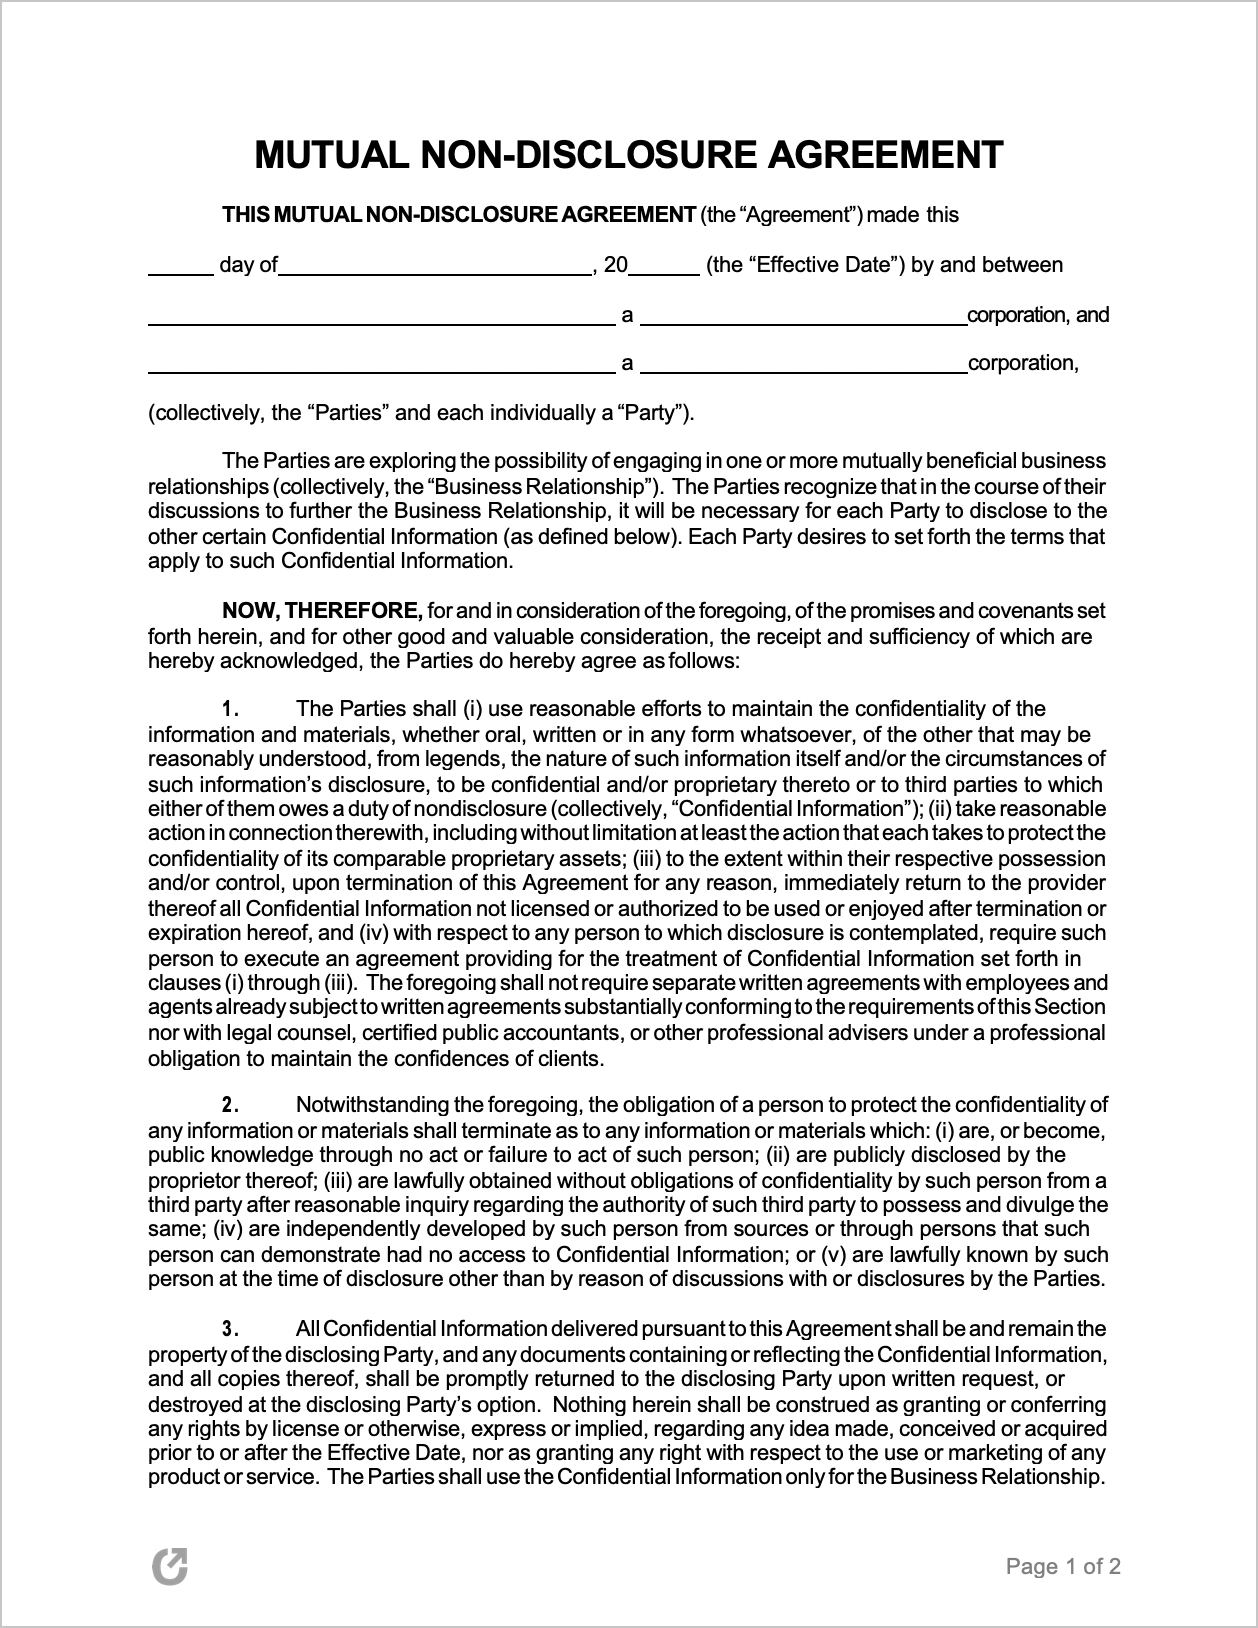 Free Mutual Non-Disclosure Agreement Template  PDF  WORD  RTF In mutual non disclosure agreement template